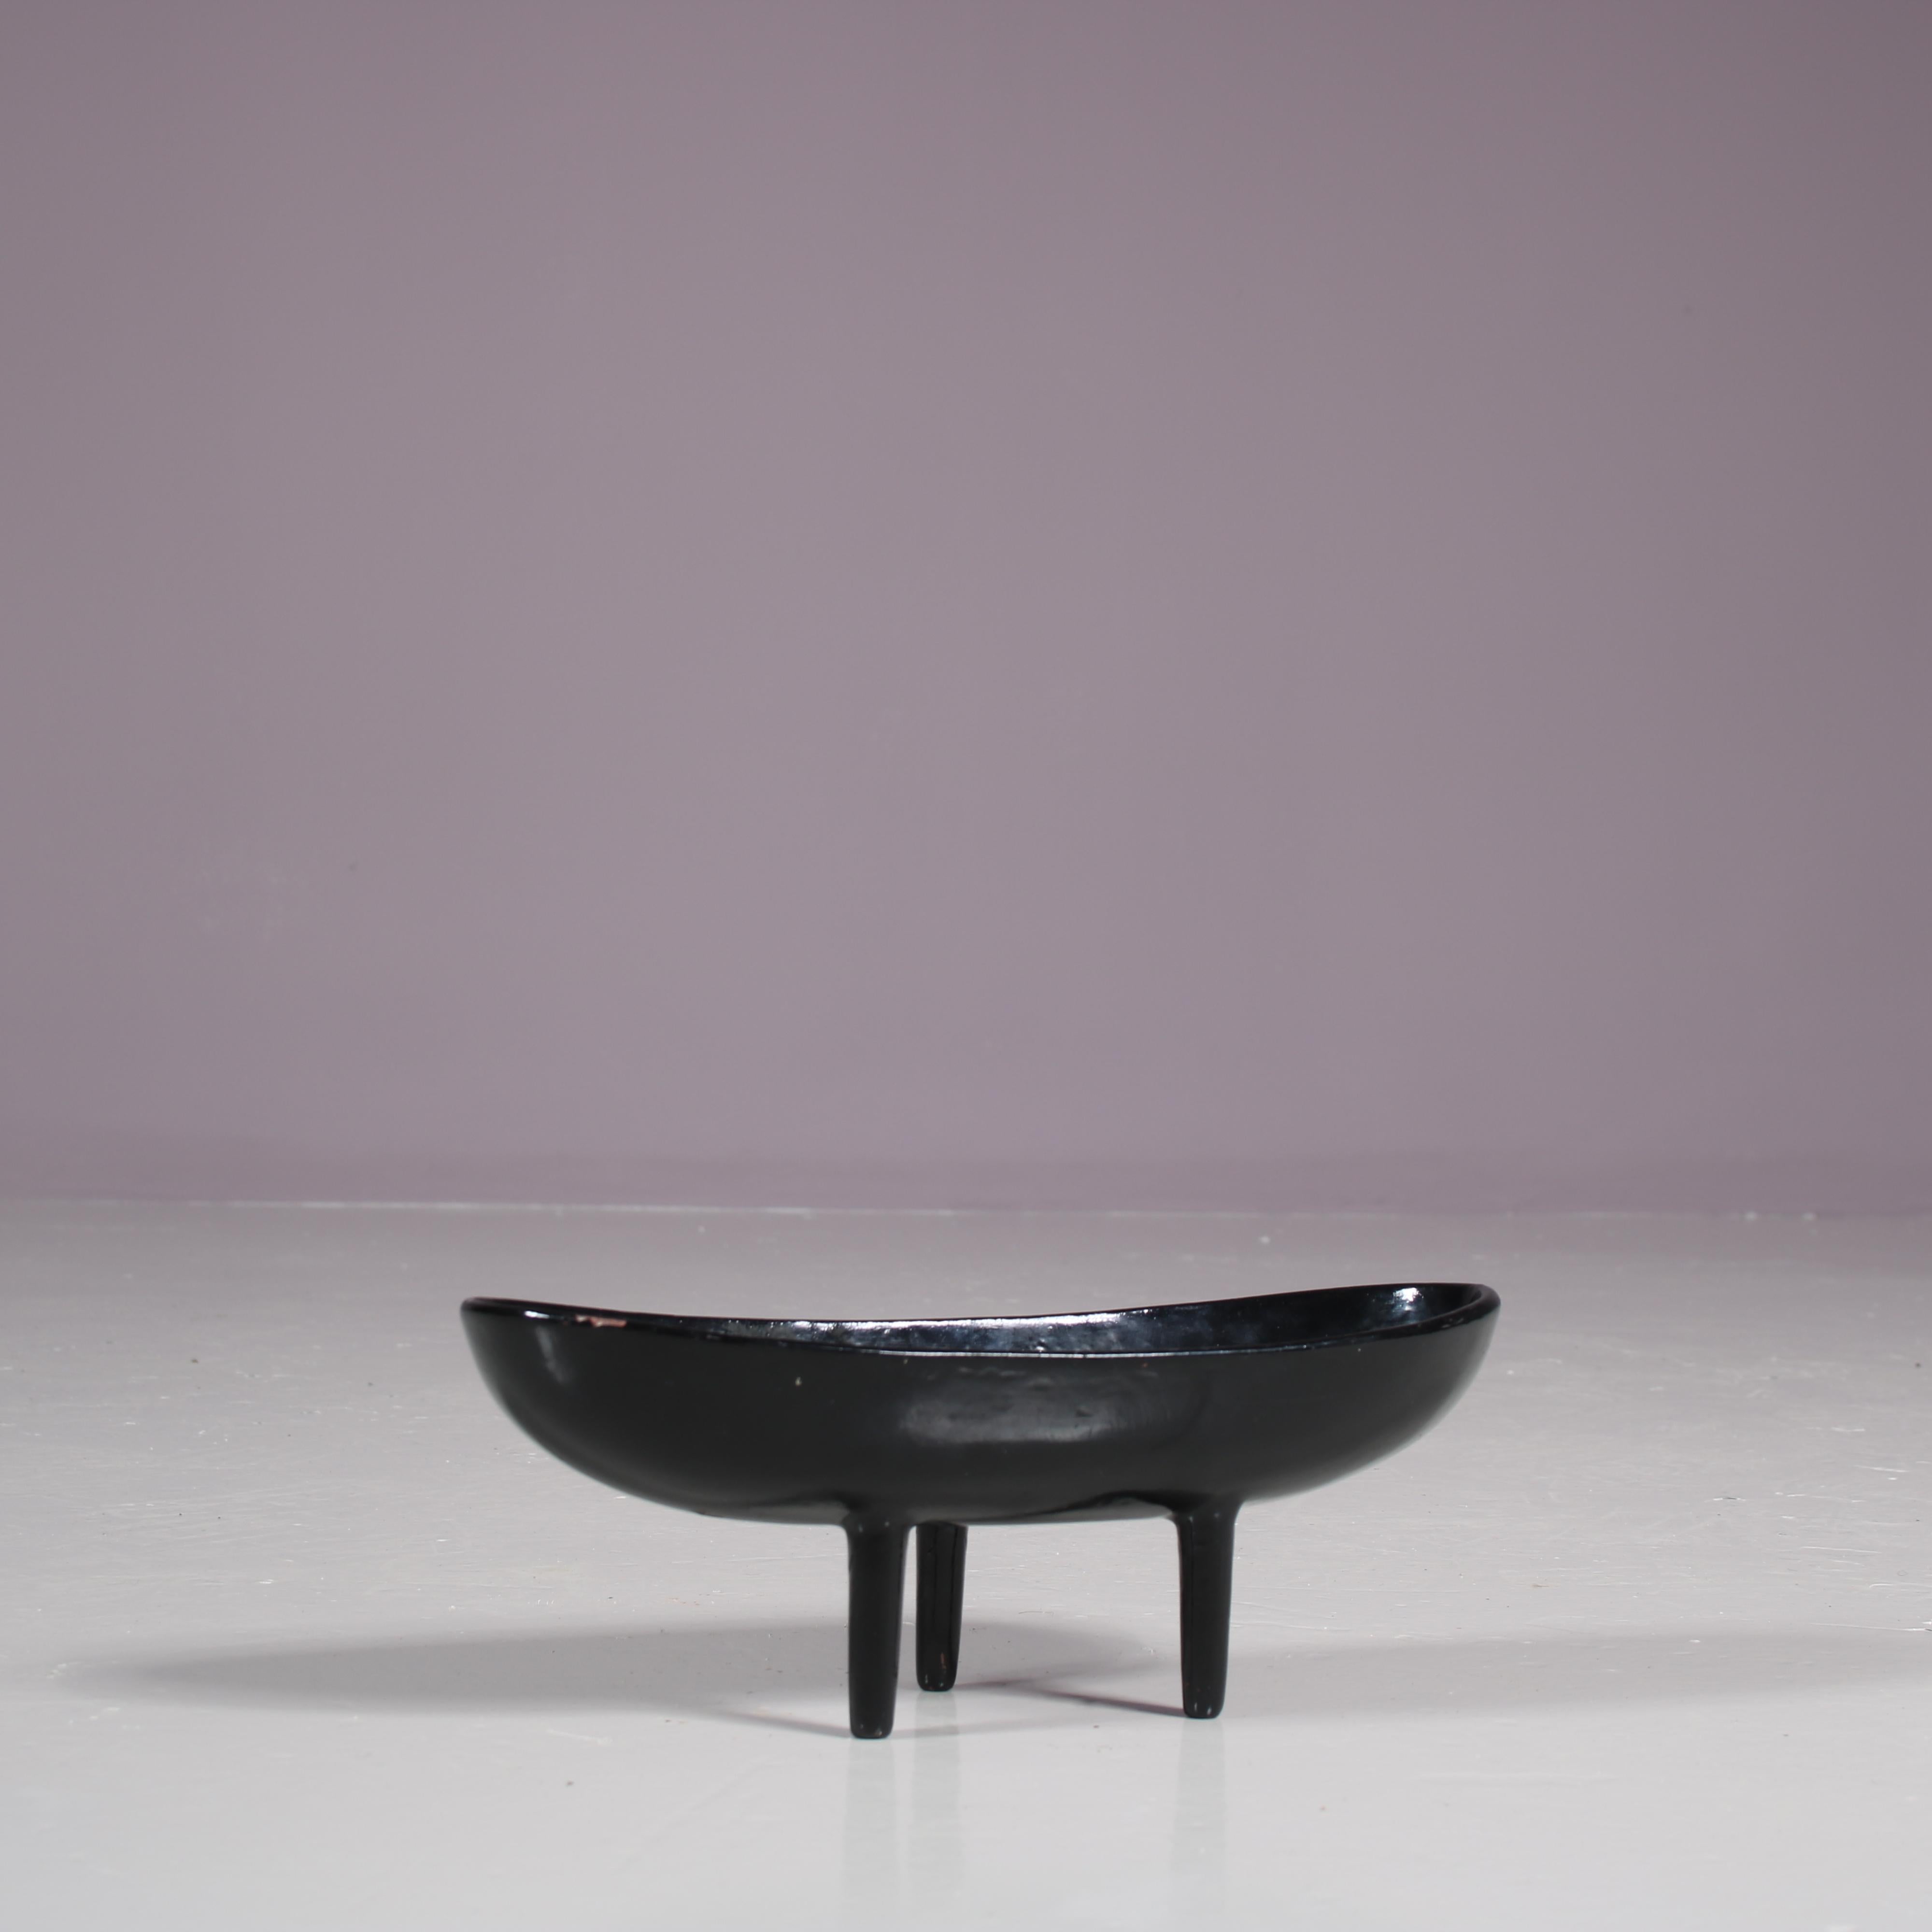 A wonderful little planter attributed to Isamu Noguchi, manufactured in Japan around 1950.

This elegant piece is made of high quality cast iron, black lacquered with a very nice finish. It has an elegant shape, three rounded legs and is all